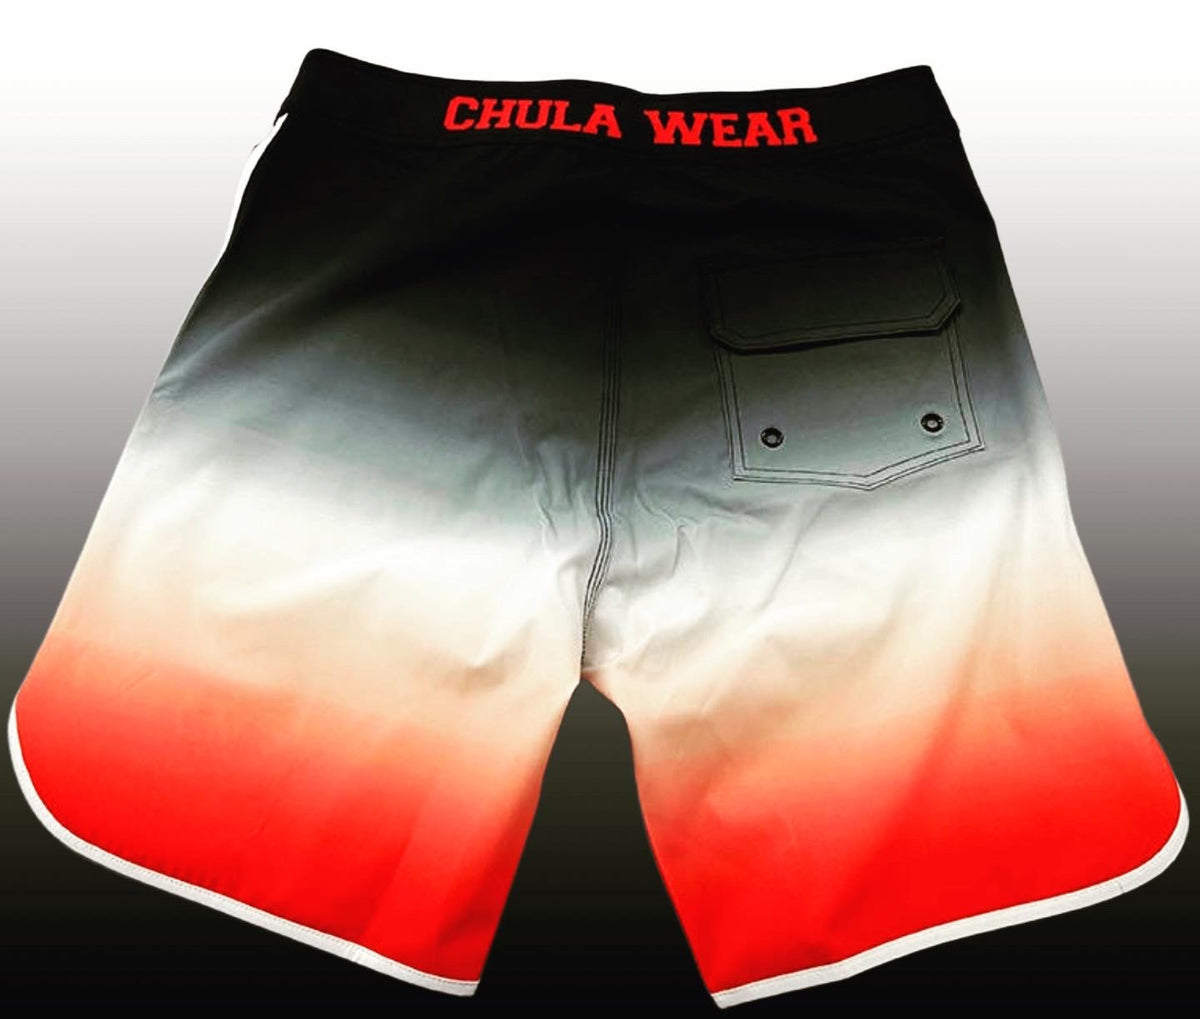 Men's Physique Shorts – Team Chula Fitness